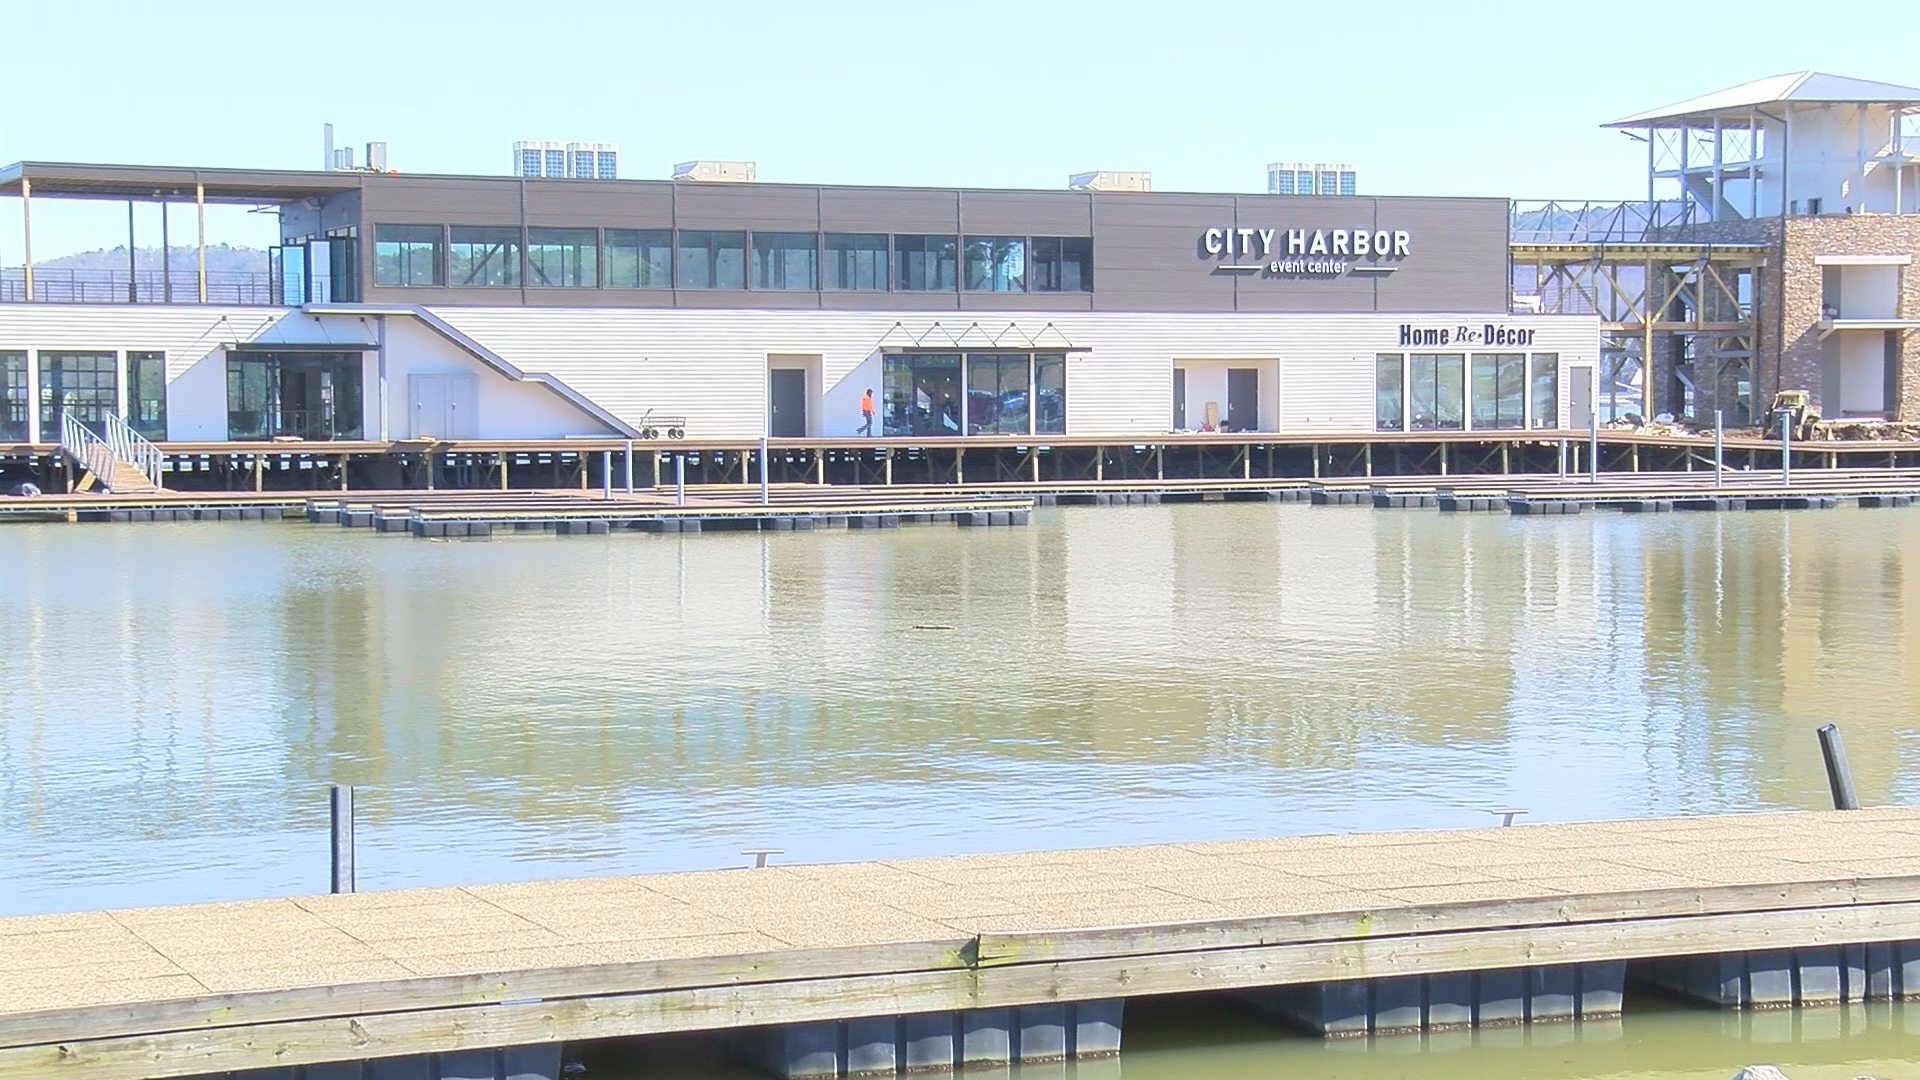 City Harbor expected to open in May